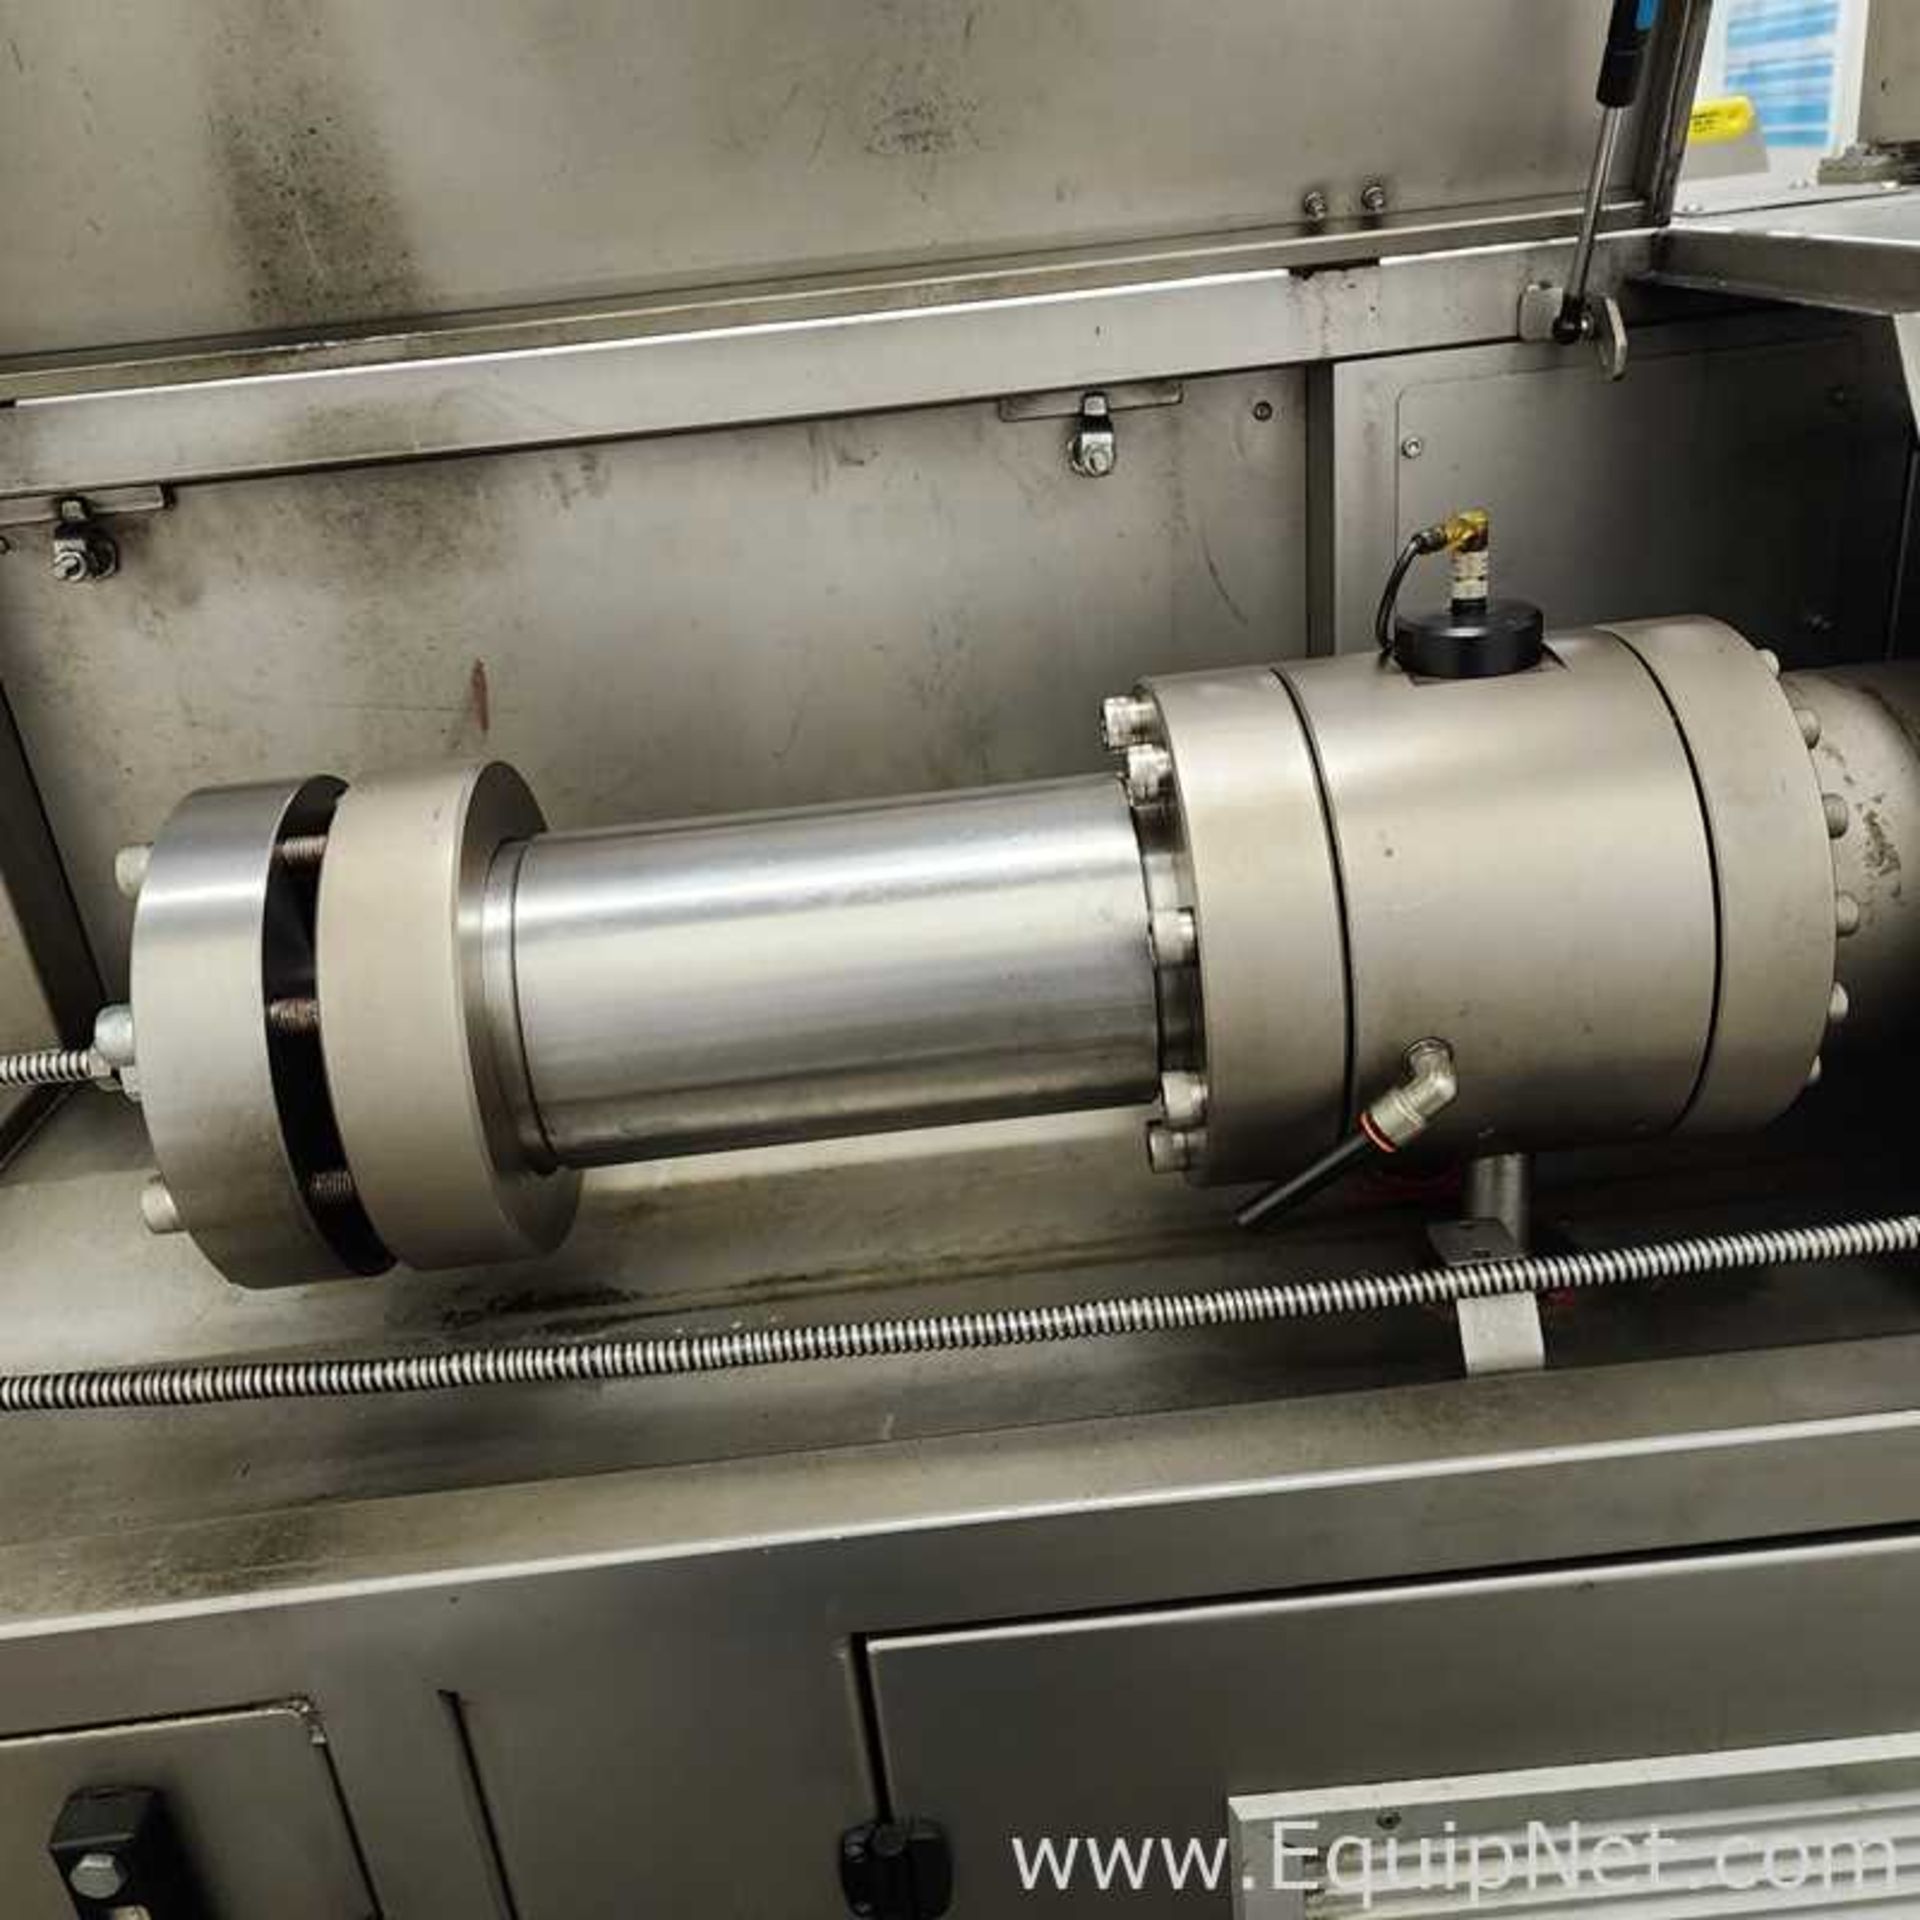 Desmasa S.L INT DMB Pair Of Ultra High Pressure Intensifier Pumps For Water Jet Machine - Image 3 of 18